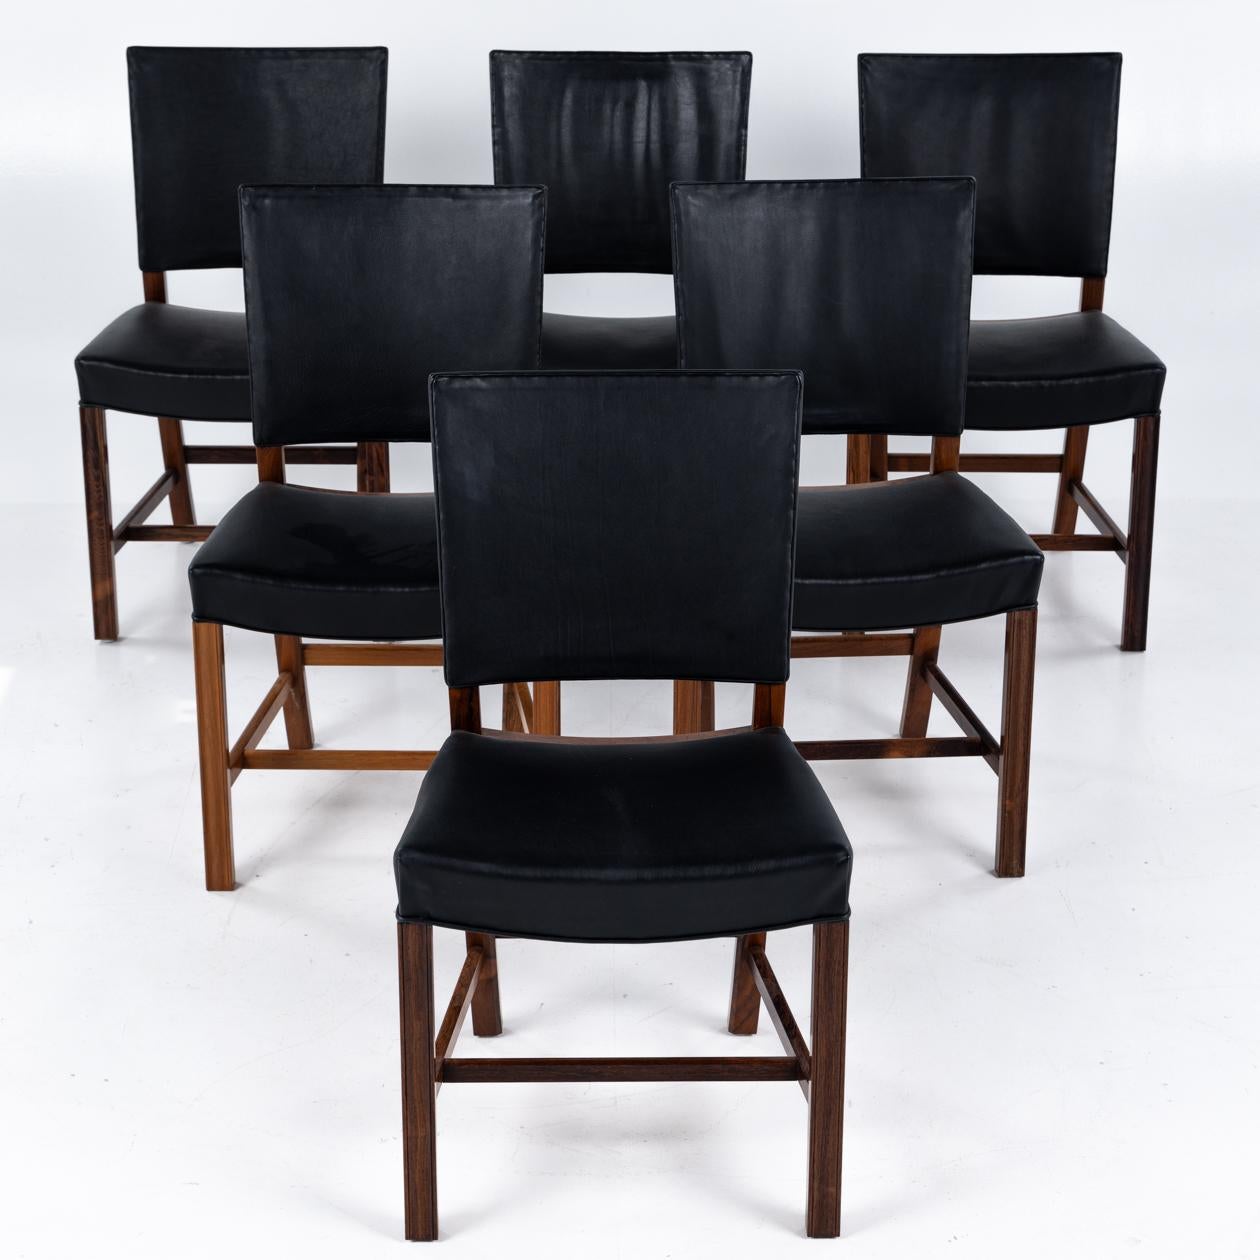 A very rare set of Rio rosewood Barcelona chairs by Kaare Klint For Sale 4